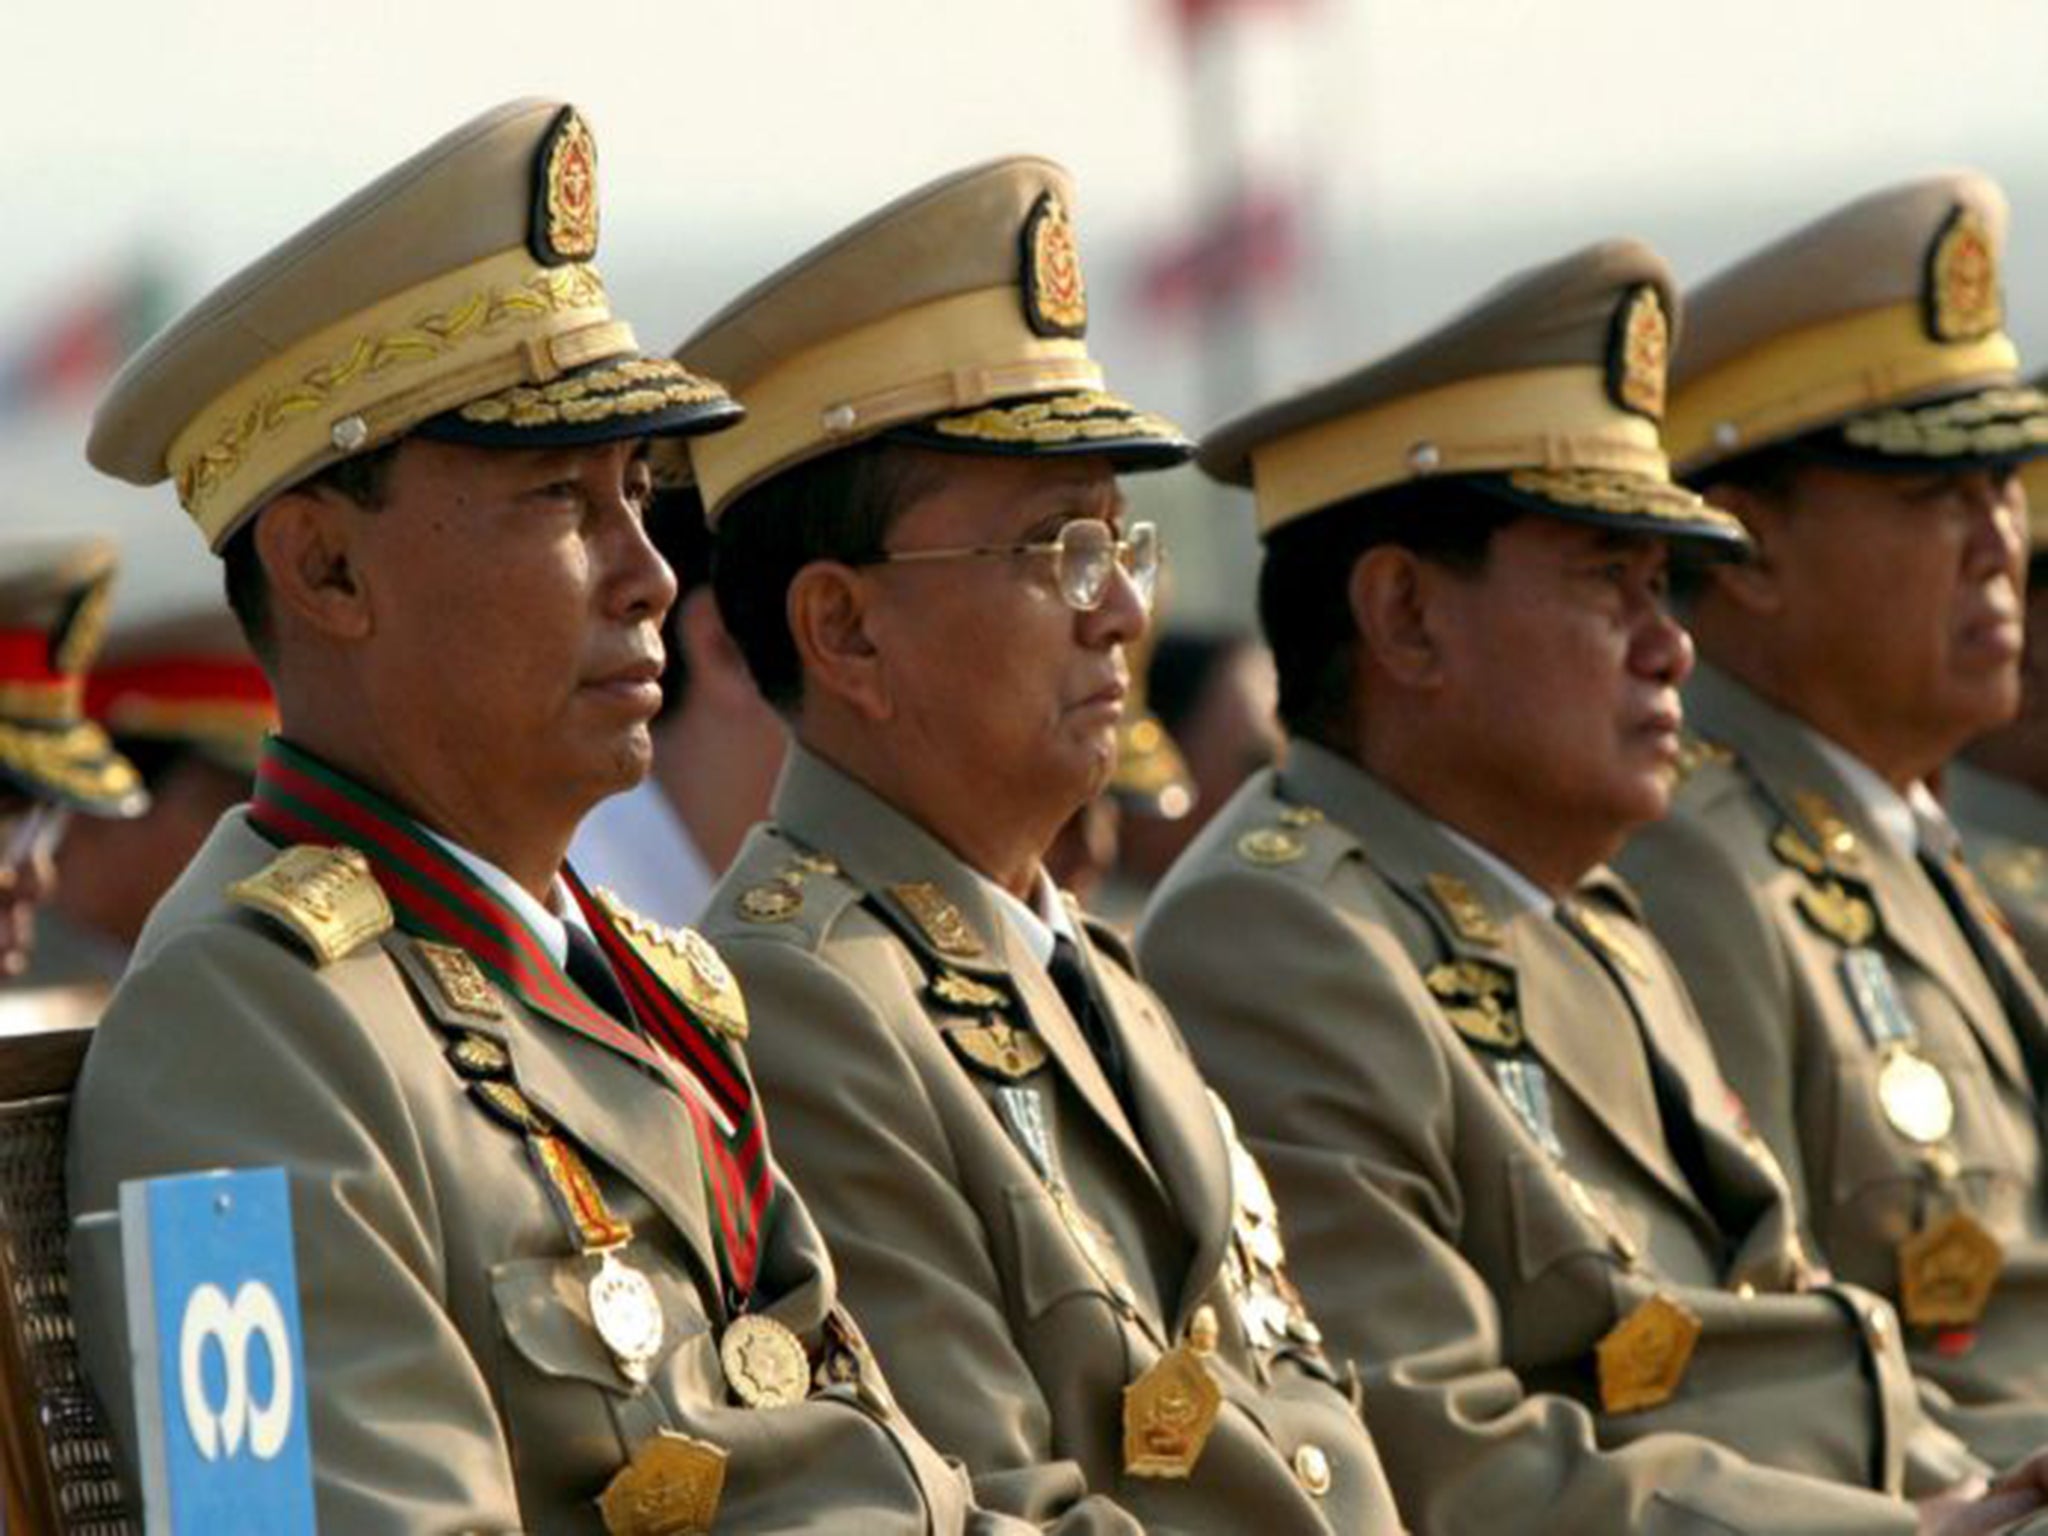 Myanmar's junta leaders General Thura Shwe Mann (L), General Thein Sein (2-L) and General Kyaw Win (3-L) attend the 62nd anniversary of the Armed Forces Day in the new capital of Naypyitaw, Myanmar, 27 March 2007. The leaders of Myanmar's ruling party wer